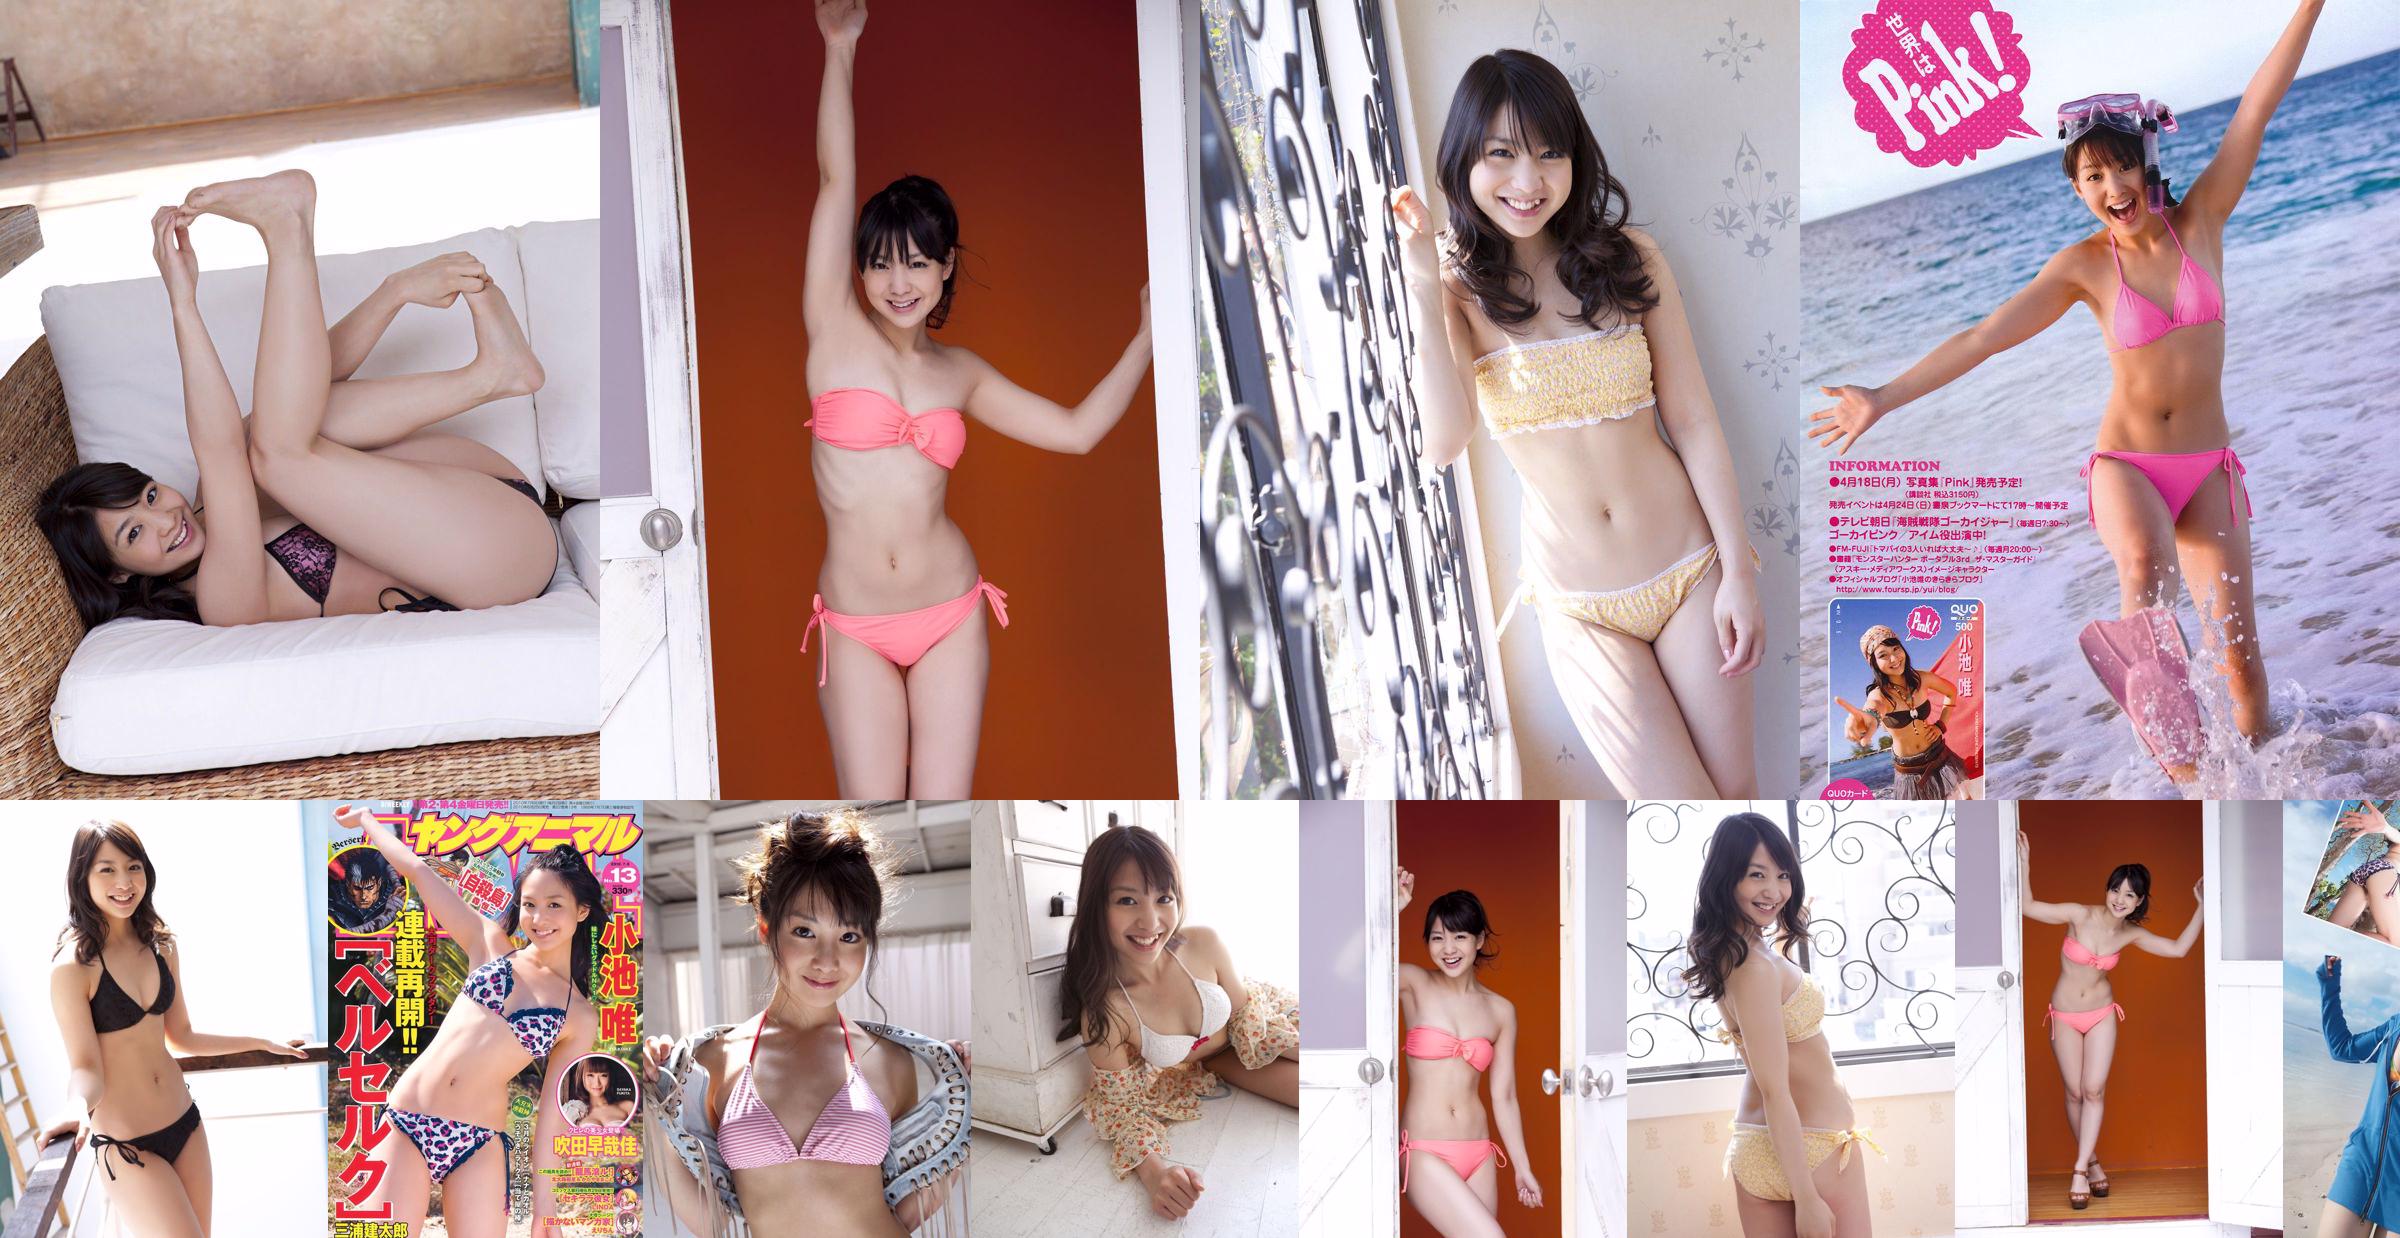 Yui Koike "FOREVER 21" [Sabra.net] Cover Girl No.5b846d Page 1